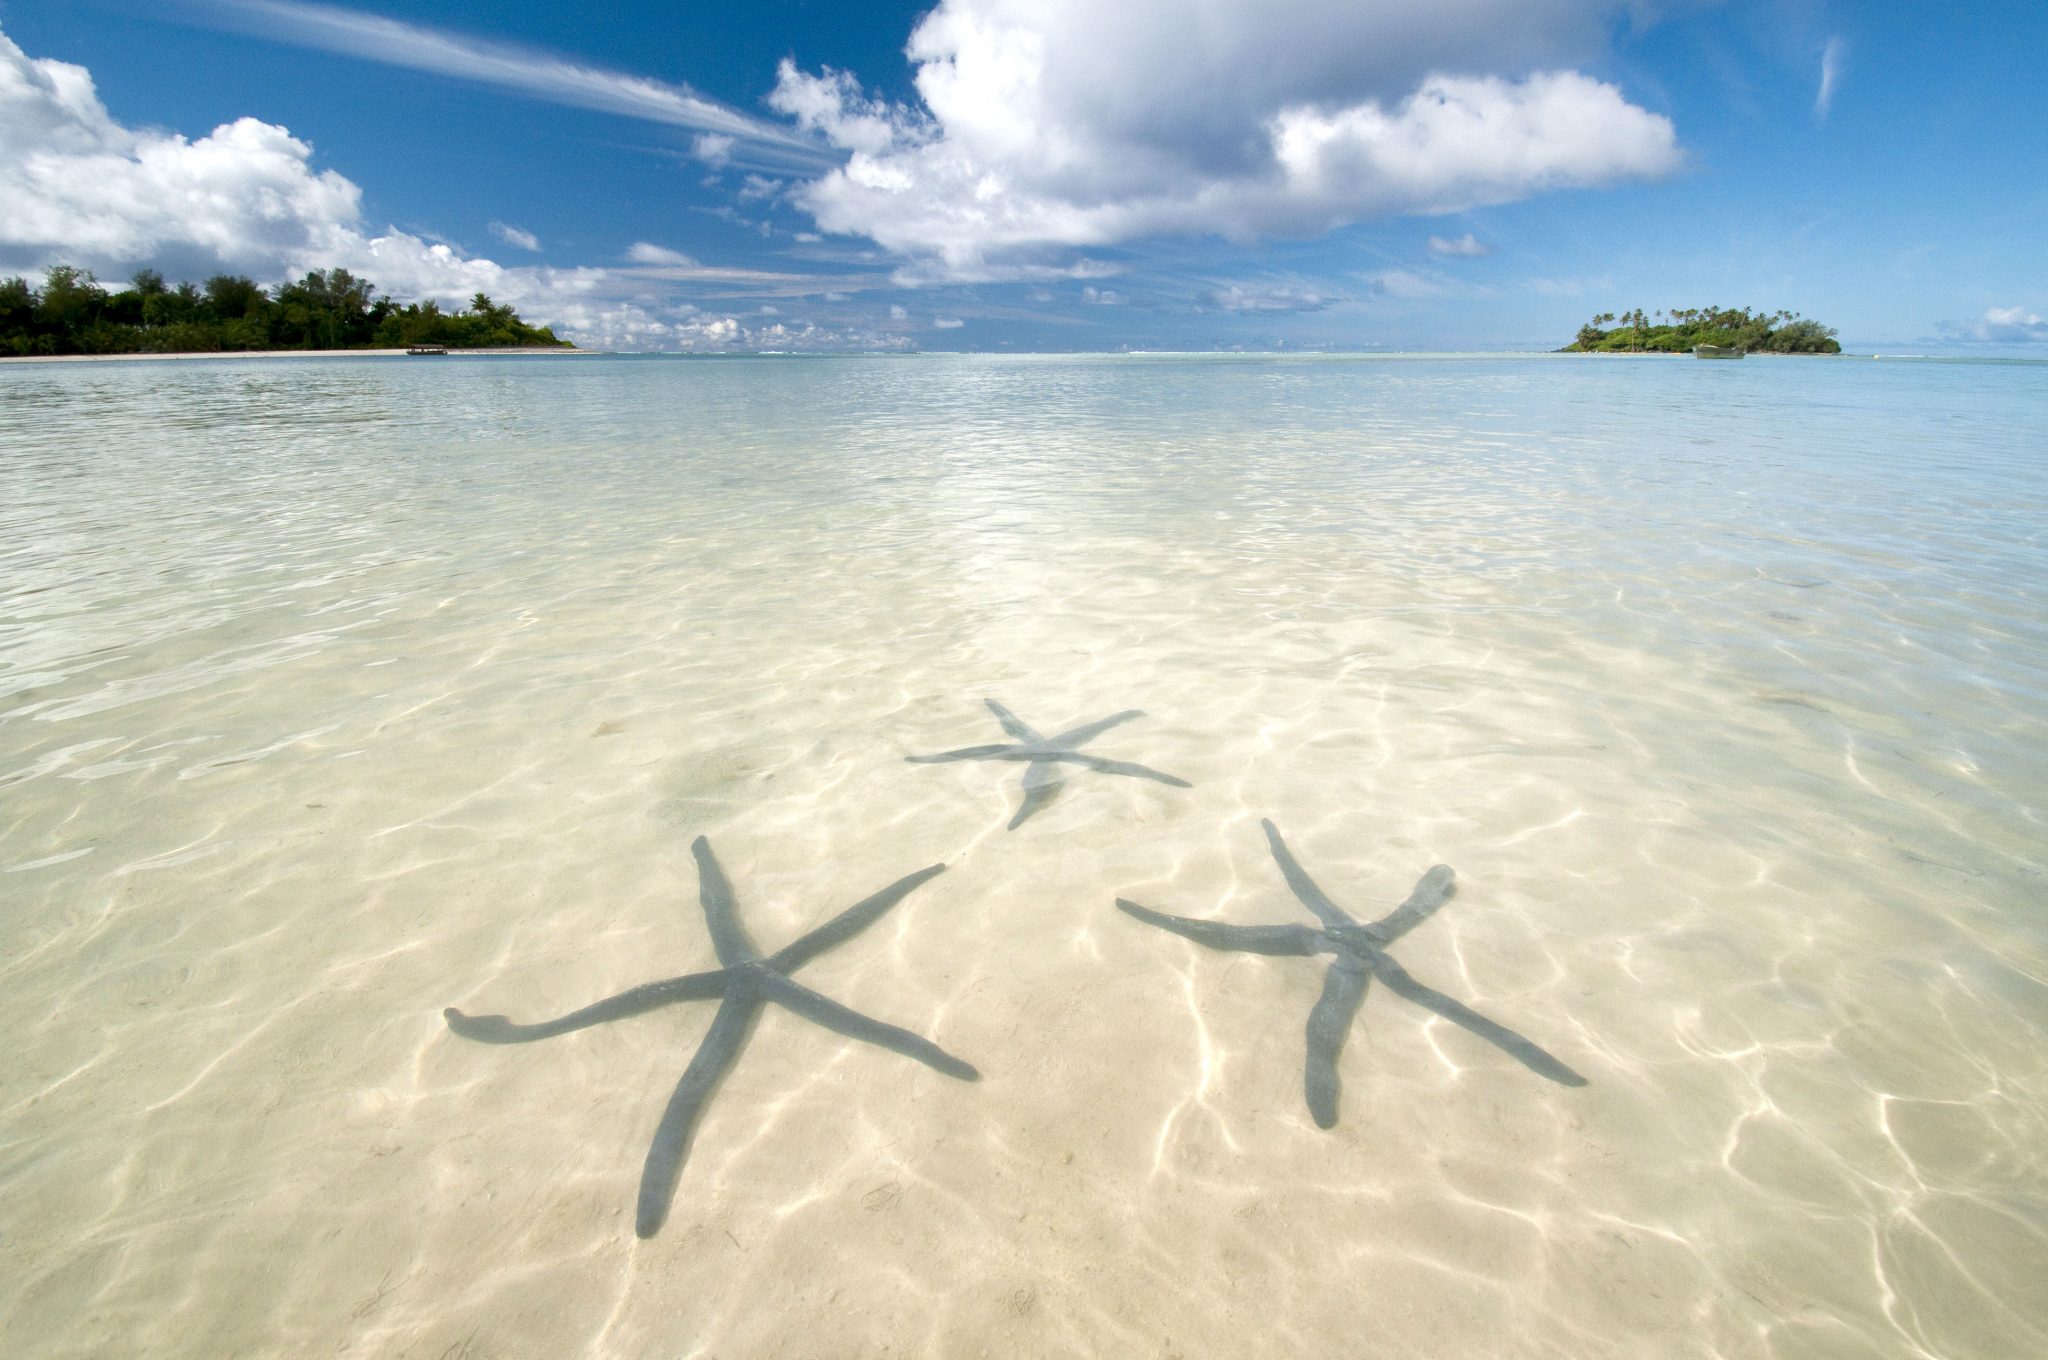 Three beautiful star fish in the Muri lagoon, a clear side image taken during the day that features islets with a lagoon cruiser berthed at each shore and a raving blue and white sky in the background